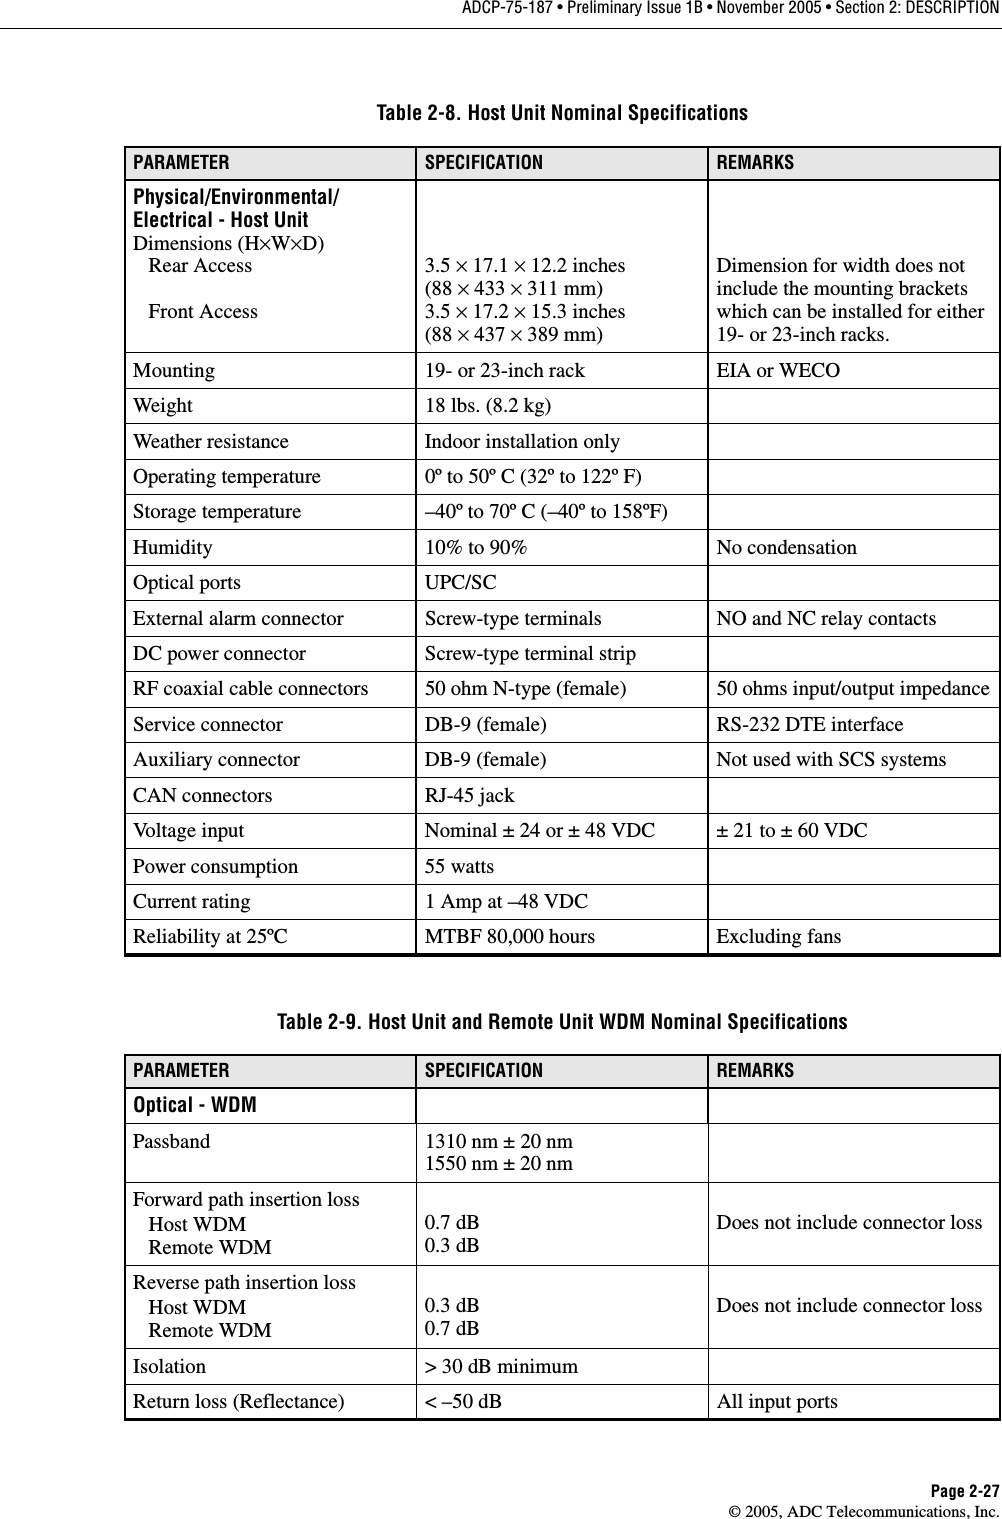 ADCP-75-187 • Preliminary Issue 1B • November 2005 • Section 2: DESCRIPTIONPage 2-27© 2005, ADC Telecommunications, Inc.Table 2-8. Host Unit Nominal SpecificationsPARAMETER SPECIFICATION REMARKSPhysical/Environmental/Electrical - Host UnitDimensions (H×W×D)   Rear Access   Front Access3.5 × 17.1 × 12.2 inches(88 × 433 × 311 mm)3.5 × 17.2 × 15.3 inches(88 × 437 × 389 mm)Dimension for width does not include the mounting brackets which can be installed for either 19- or 23-inch racks. Mounting 19- or 23-inch rack EIA or WECOWeight 18 lbs. (8.2 kg)Weather resistance Indoor installation onlyOperating temperature 0º to 50º C (32º to 122º F)Storage temperature –40º to 70º C (–40º to 158ºF)Humidity 10% to 90% No condensationOptical ports UPC/SCExternal alarm connector Screw-type terminals NO and NC relay contactsDC power connector Screw-type terminal stripRF coaxial cable connectors 50 ohm N-type (female) 50 ohms input/output impedanceService connector DB-9 (female) RS-232 DTE interfaceAuxiliary connector DB-9 (female) Not used with SCS systemsCAN connectors RJ-45 jackVoltage input Nominal ± 24 or ± 48 VDC ± 21 to ± 60 VDCPower consumption 55 wattsCurrent rating 1 Amp at –48 VDCReliability at 25ºC MTBF 80,000 hours Excluding fansTable 2-9. Host Unit and Remote Unit WDM Nominal SpecificationsPARAMETER SPECIFICATION REMARKSOptical - WDMPassband 1310 nm ± 20 nm1550 nm ± 20 nmForward path insertion loss   Host WDM   Remote WDM0.7 dB0.3 dBDoes not include connector lossReverse path insertion loss   Host WDM   Remote WDM0.3 dB0.7 dBDoes not include connector lossIsolation &gt; 30 dB minimumReturn loss (Reflectance) &lt; –50 dB All input ports